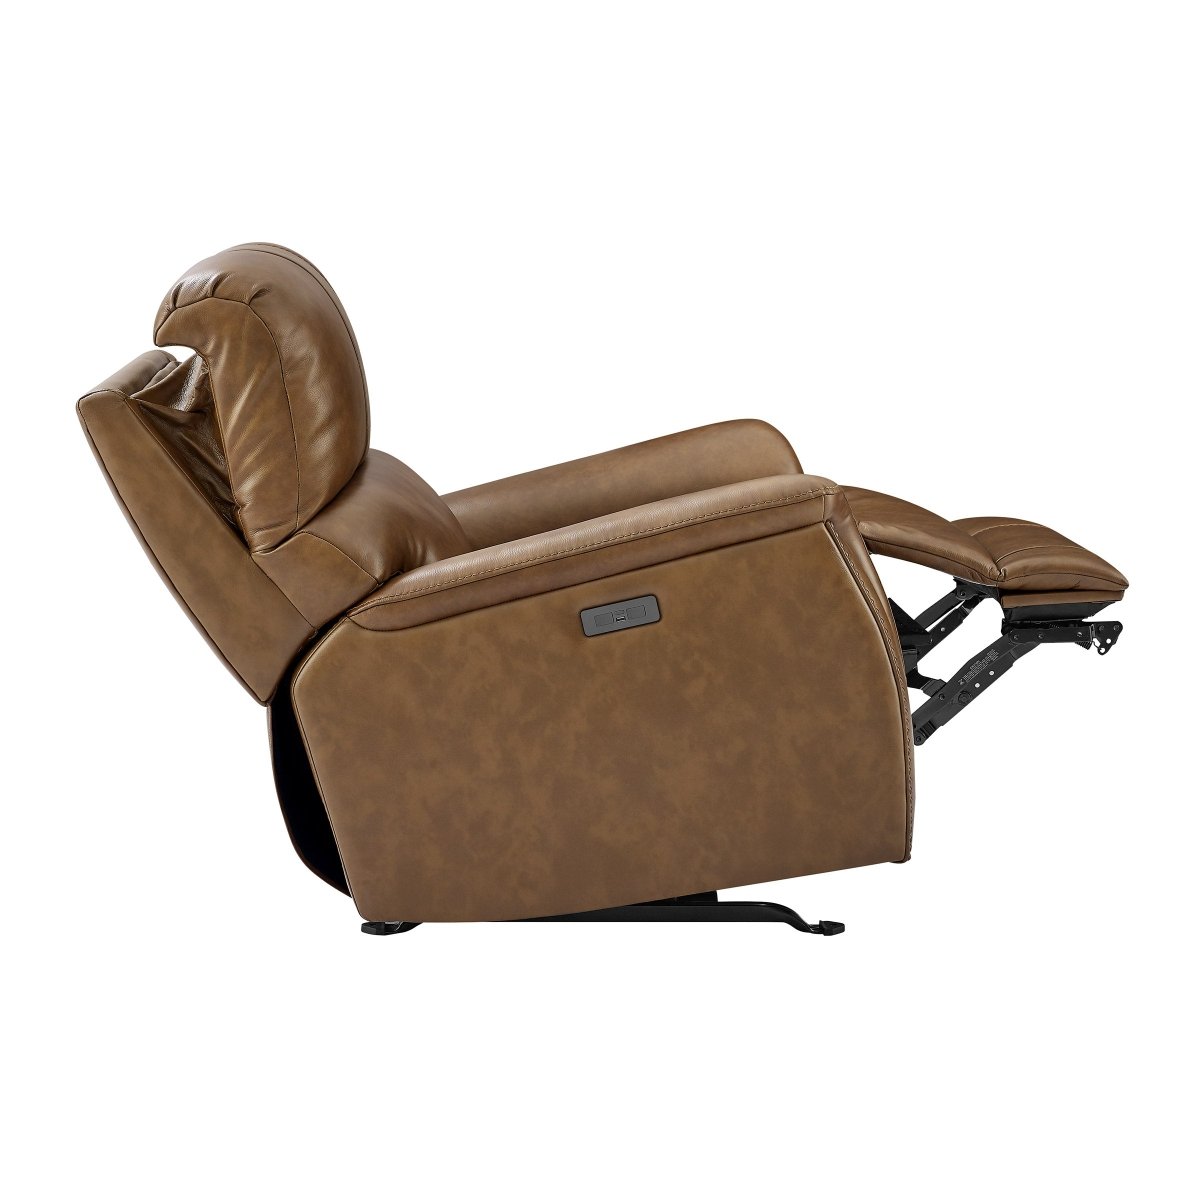 Barcalounger Presley Leather Power Rocker Recliner with Power Headrest - Alpine Outlets